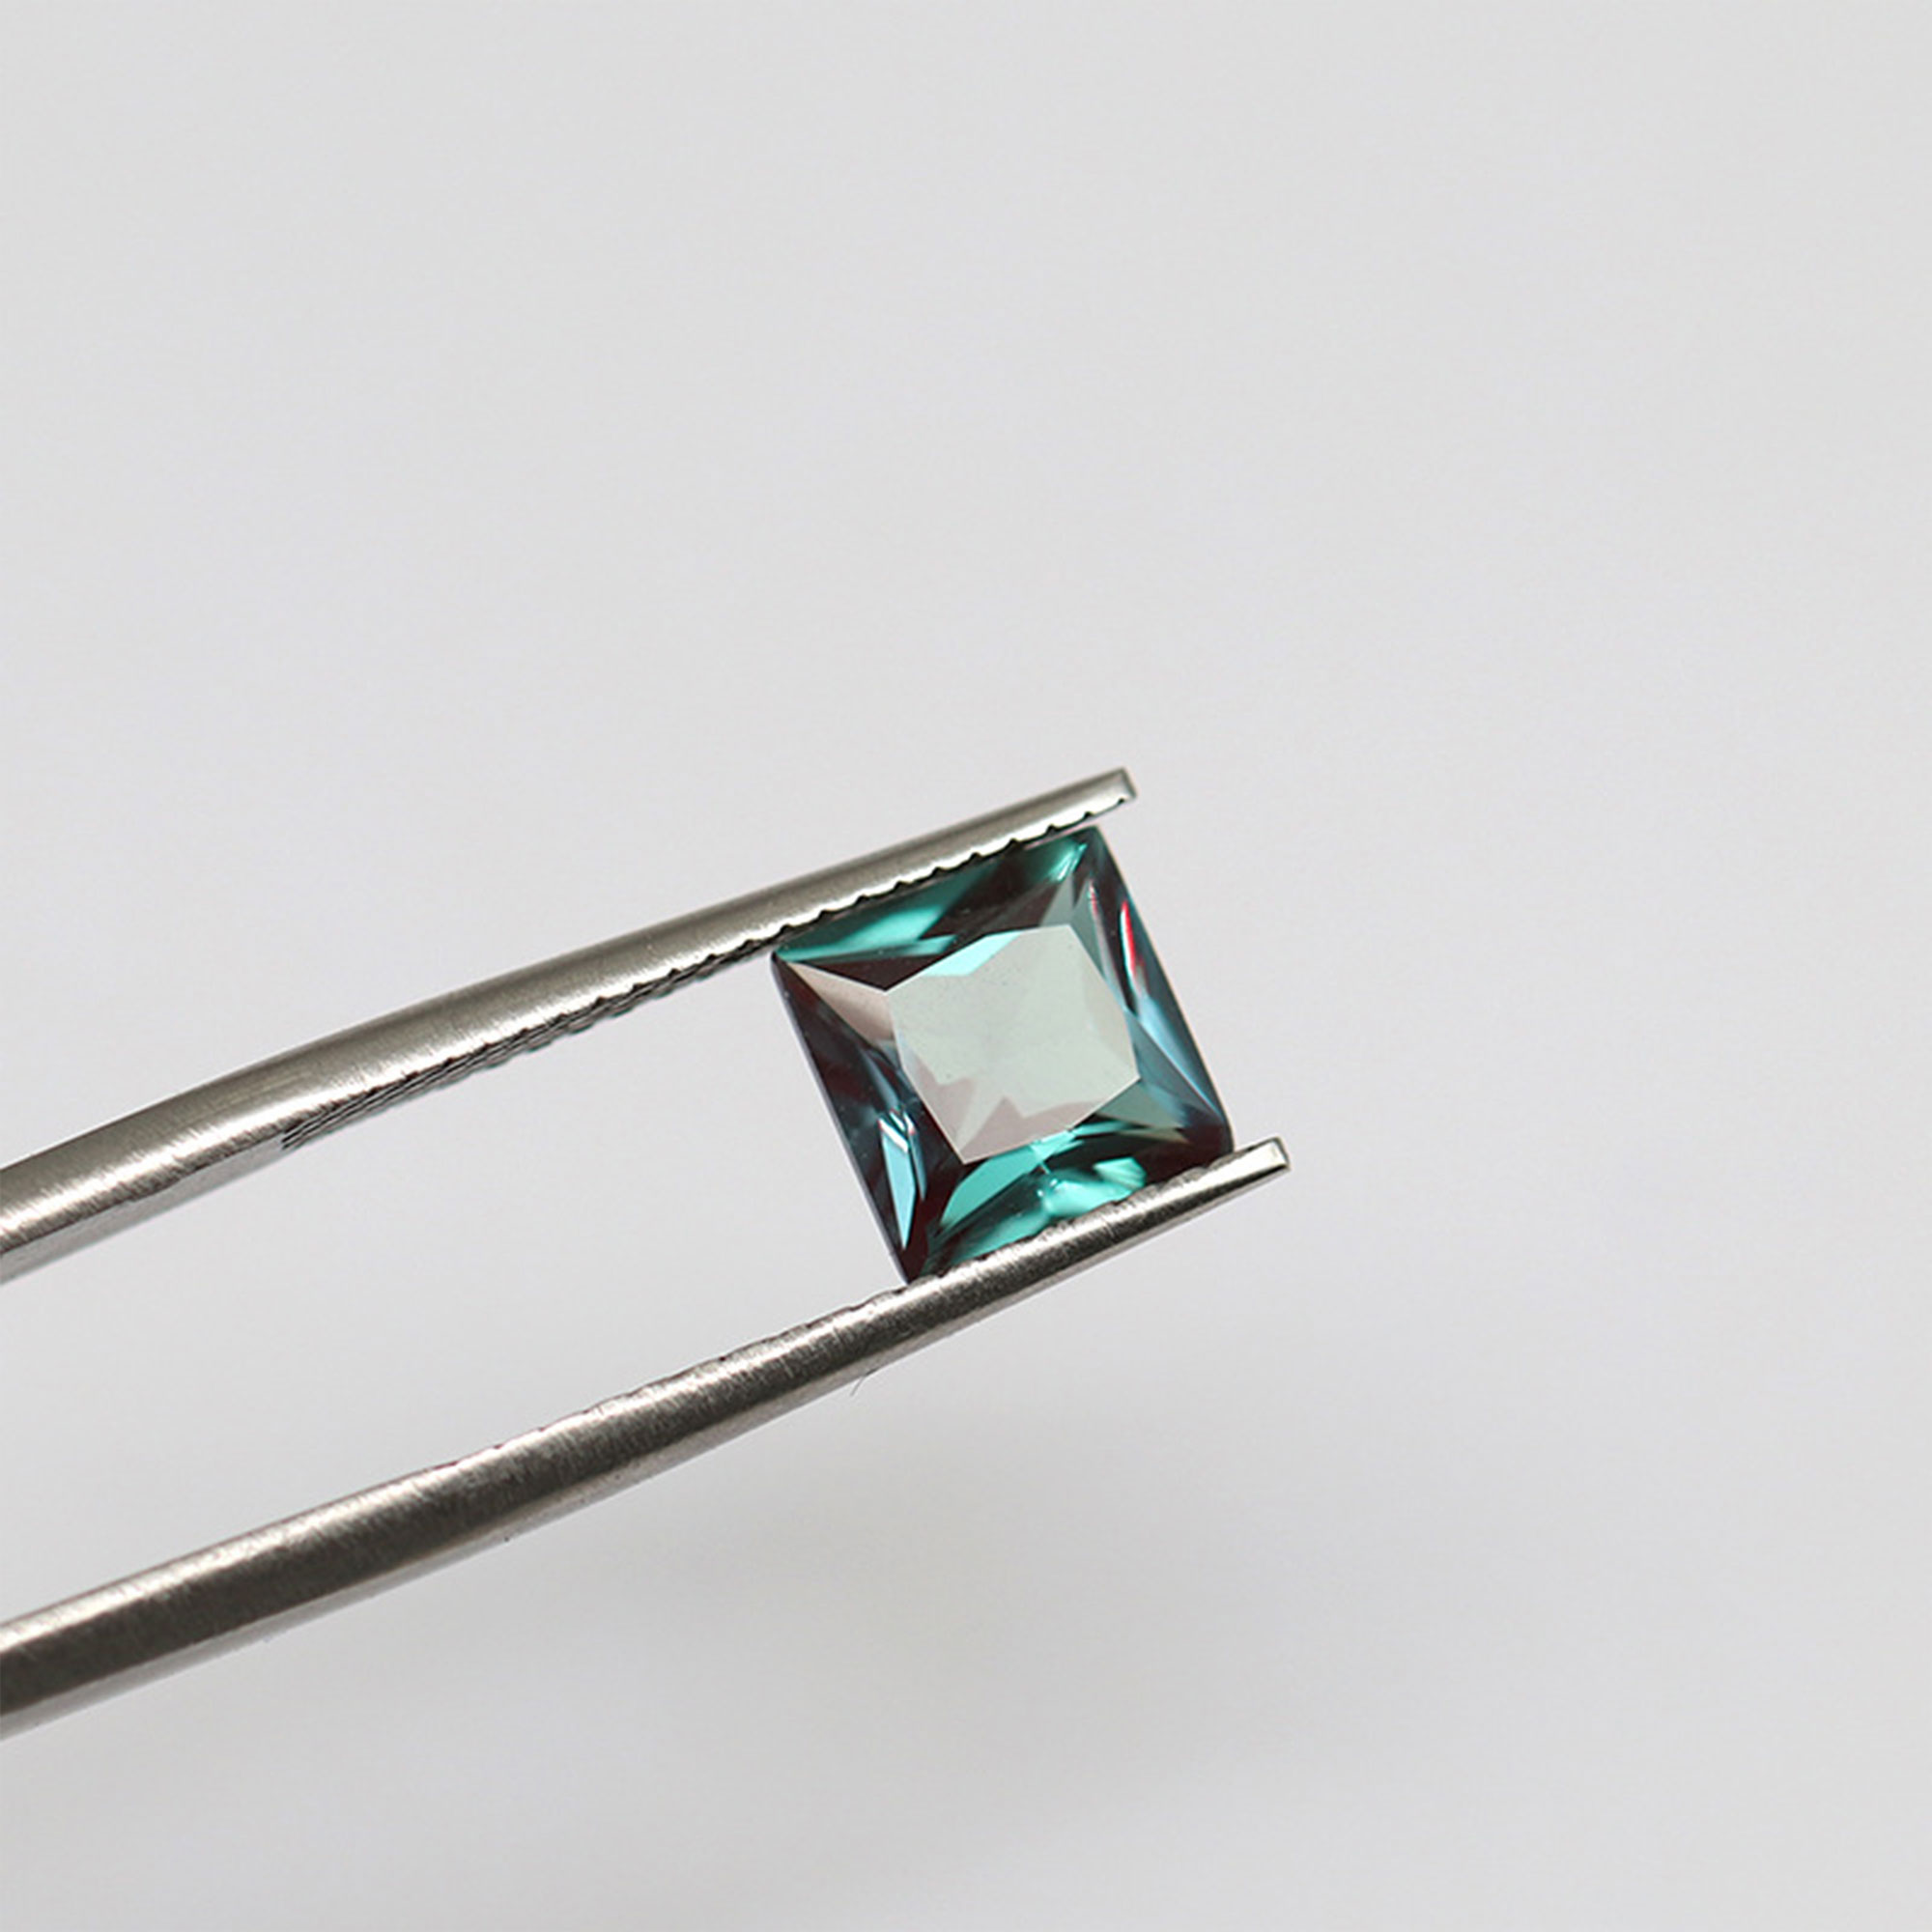 Lab Grown Alexandrite Faceted Gemstone,Princess Cut Square Color Change Stone,June Birthstone,DIY Loose Gemstone Supplies 4140029 - Click Image to Close